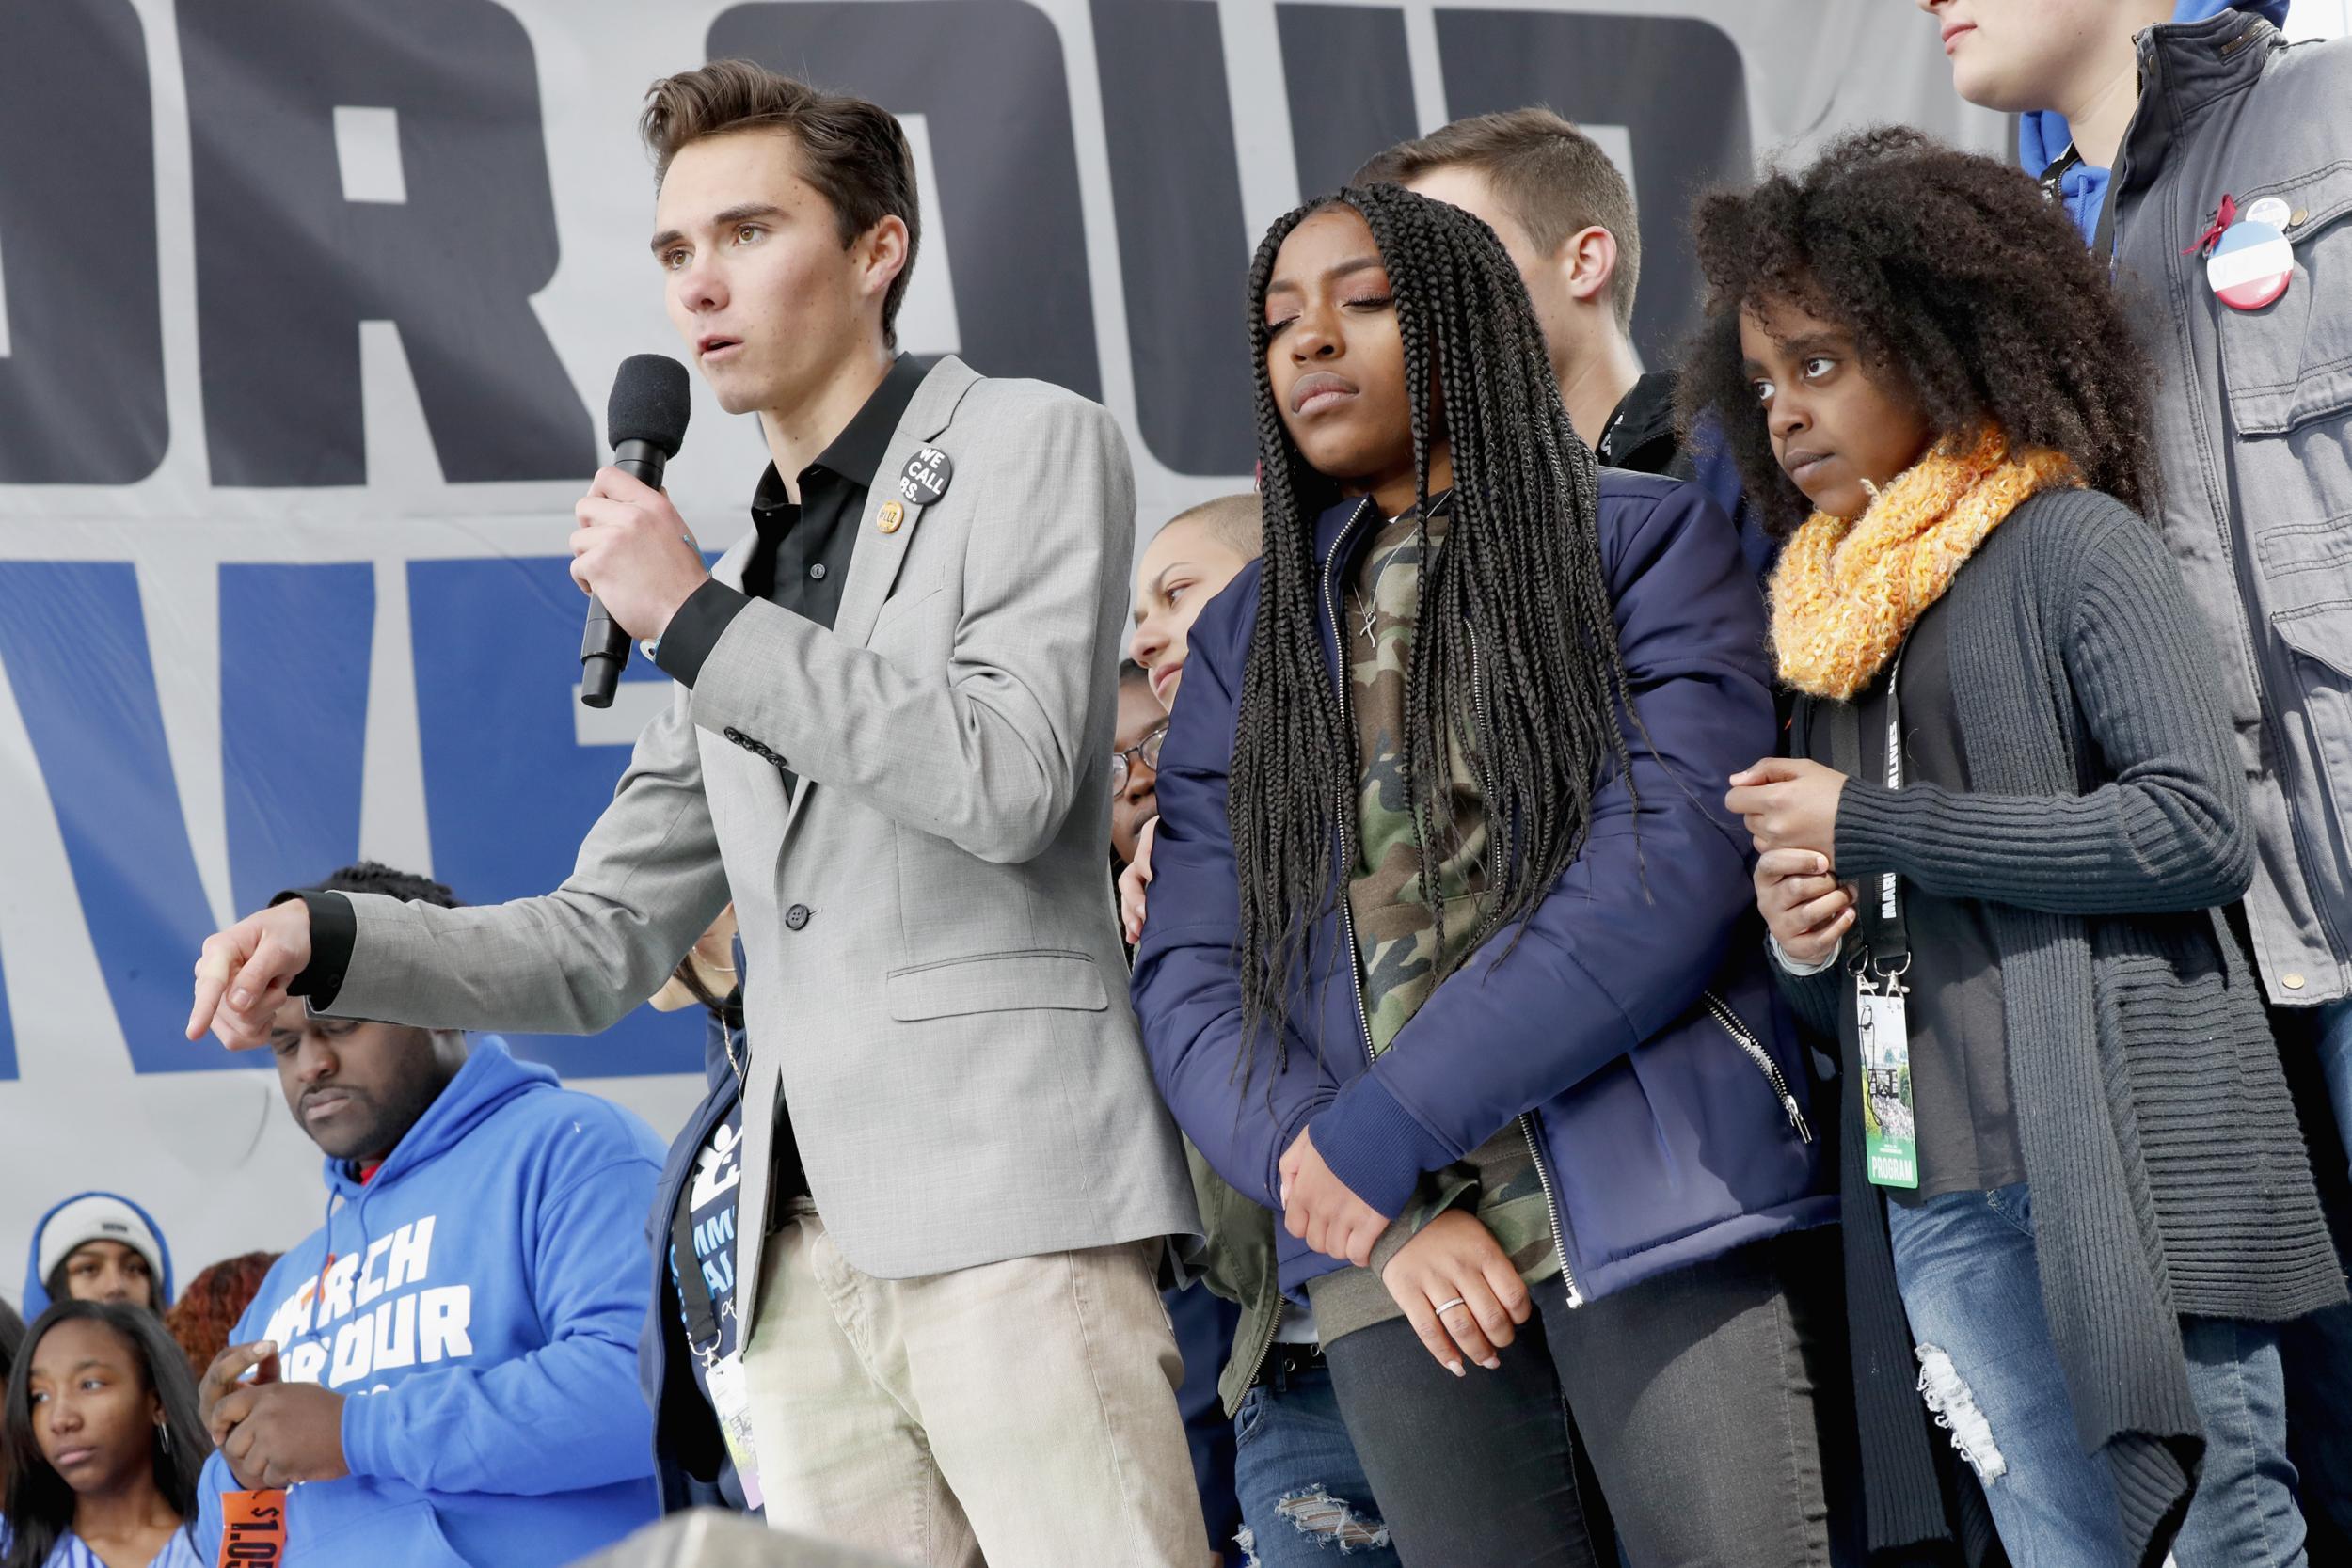 David Hogg has already handled far worse than middle-aged men who pick on kids